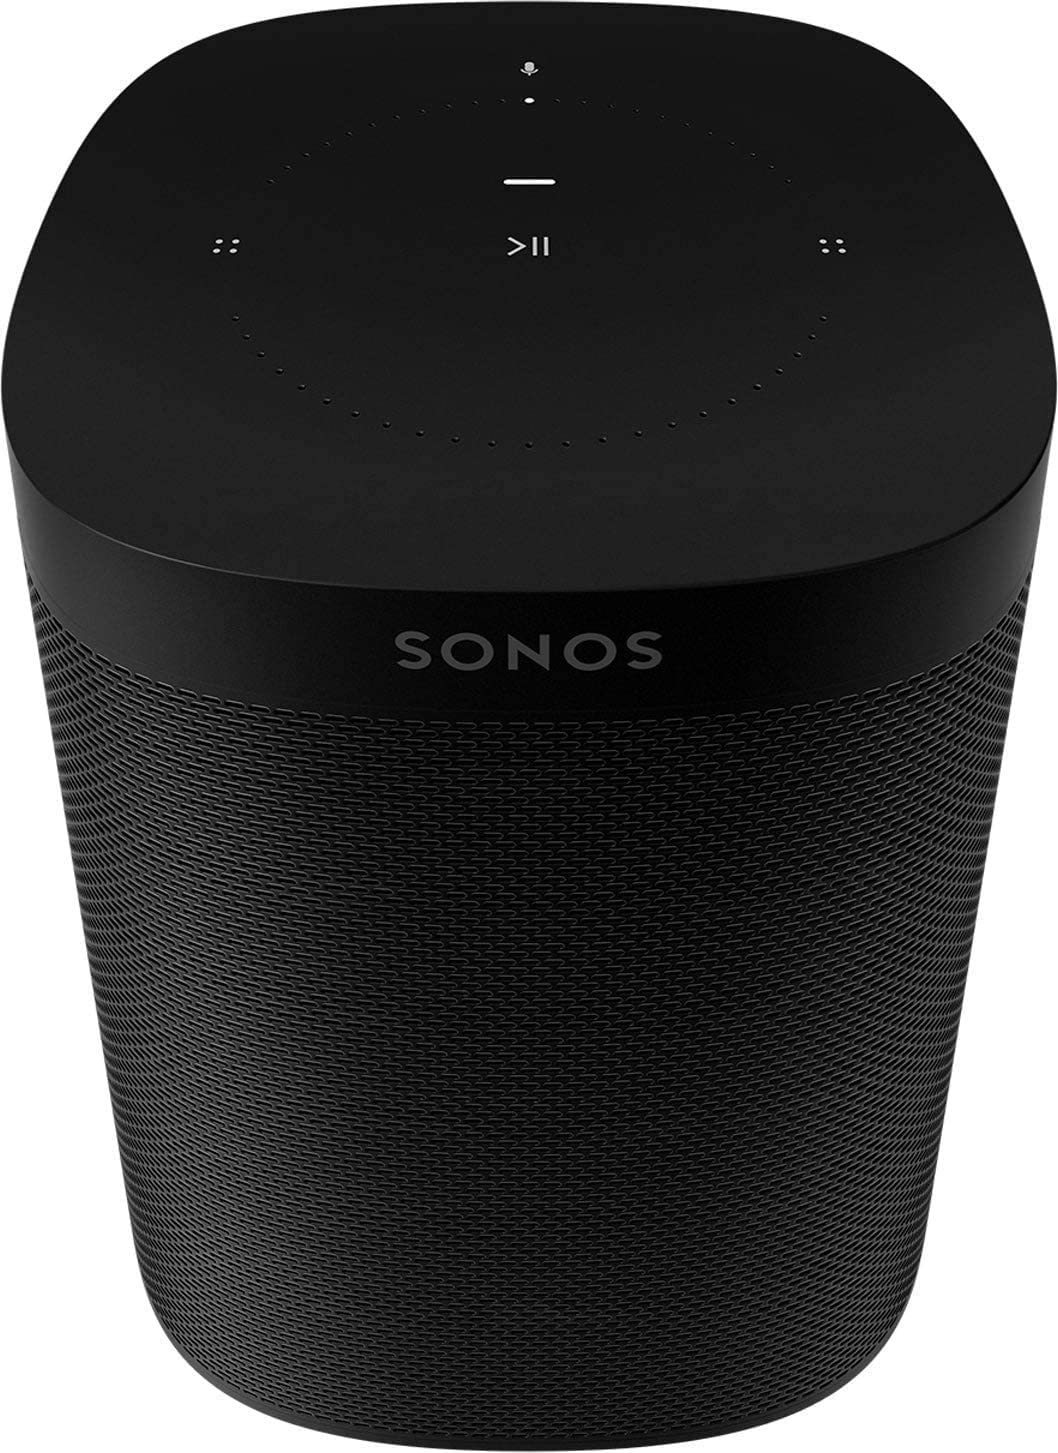 Sonos recently updated the Sonos One with a faster processor and more memory, too.